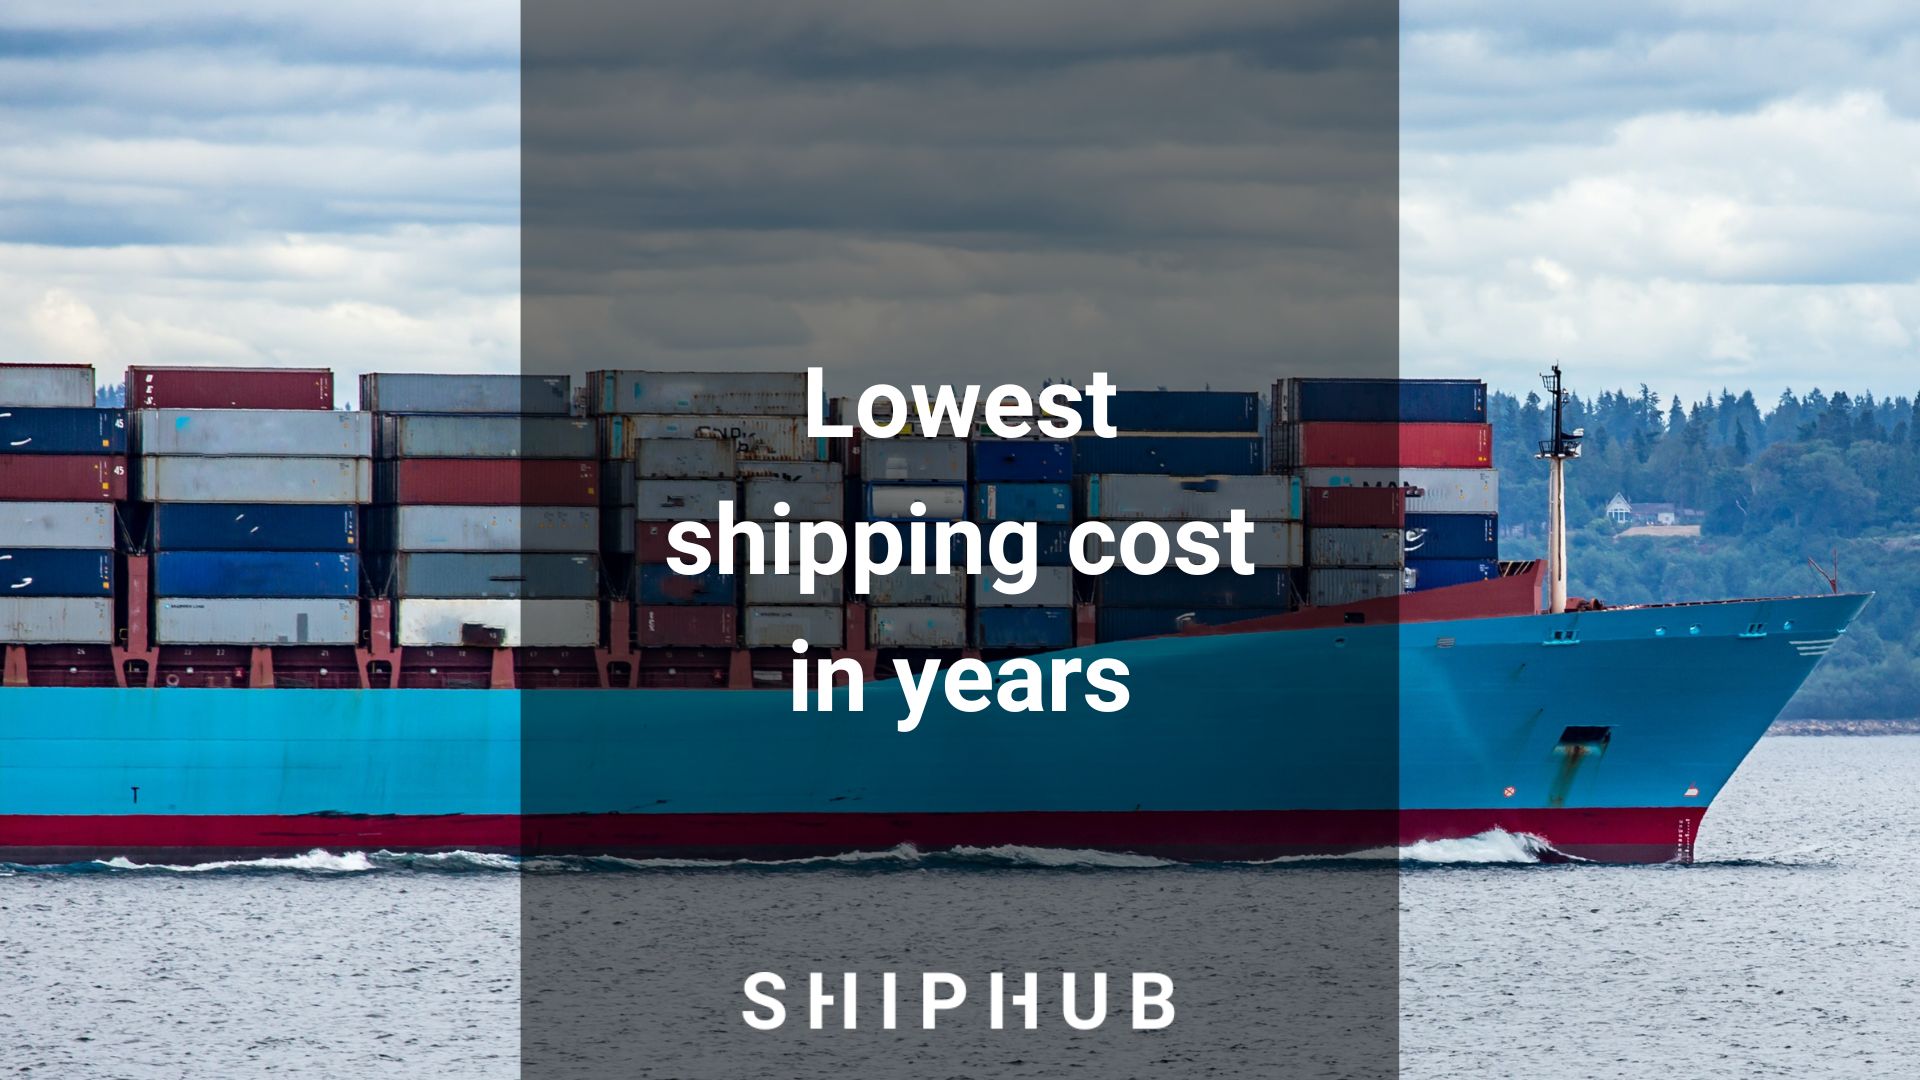 Lowest shipping cost in years